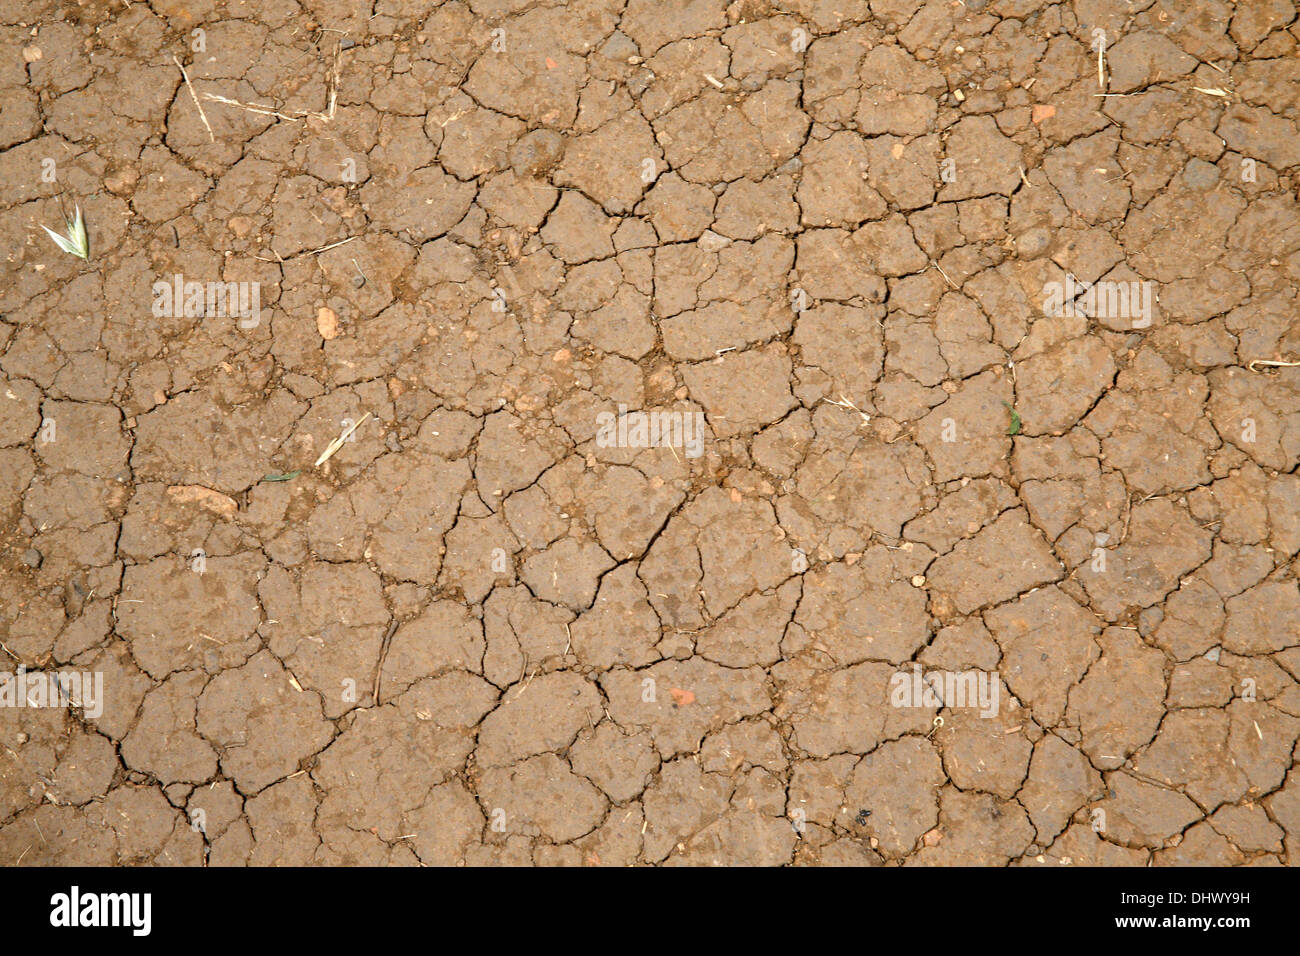 Earth craked by the dryness. Stock Photo